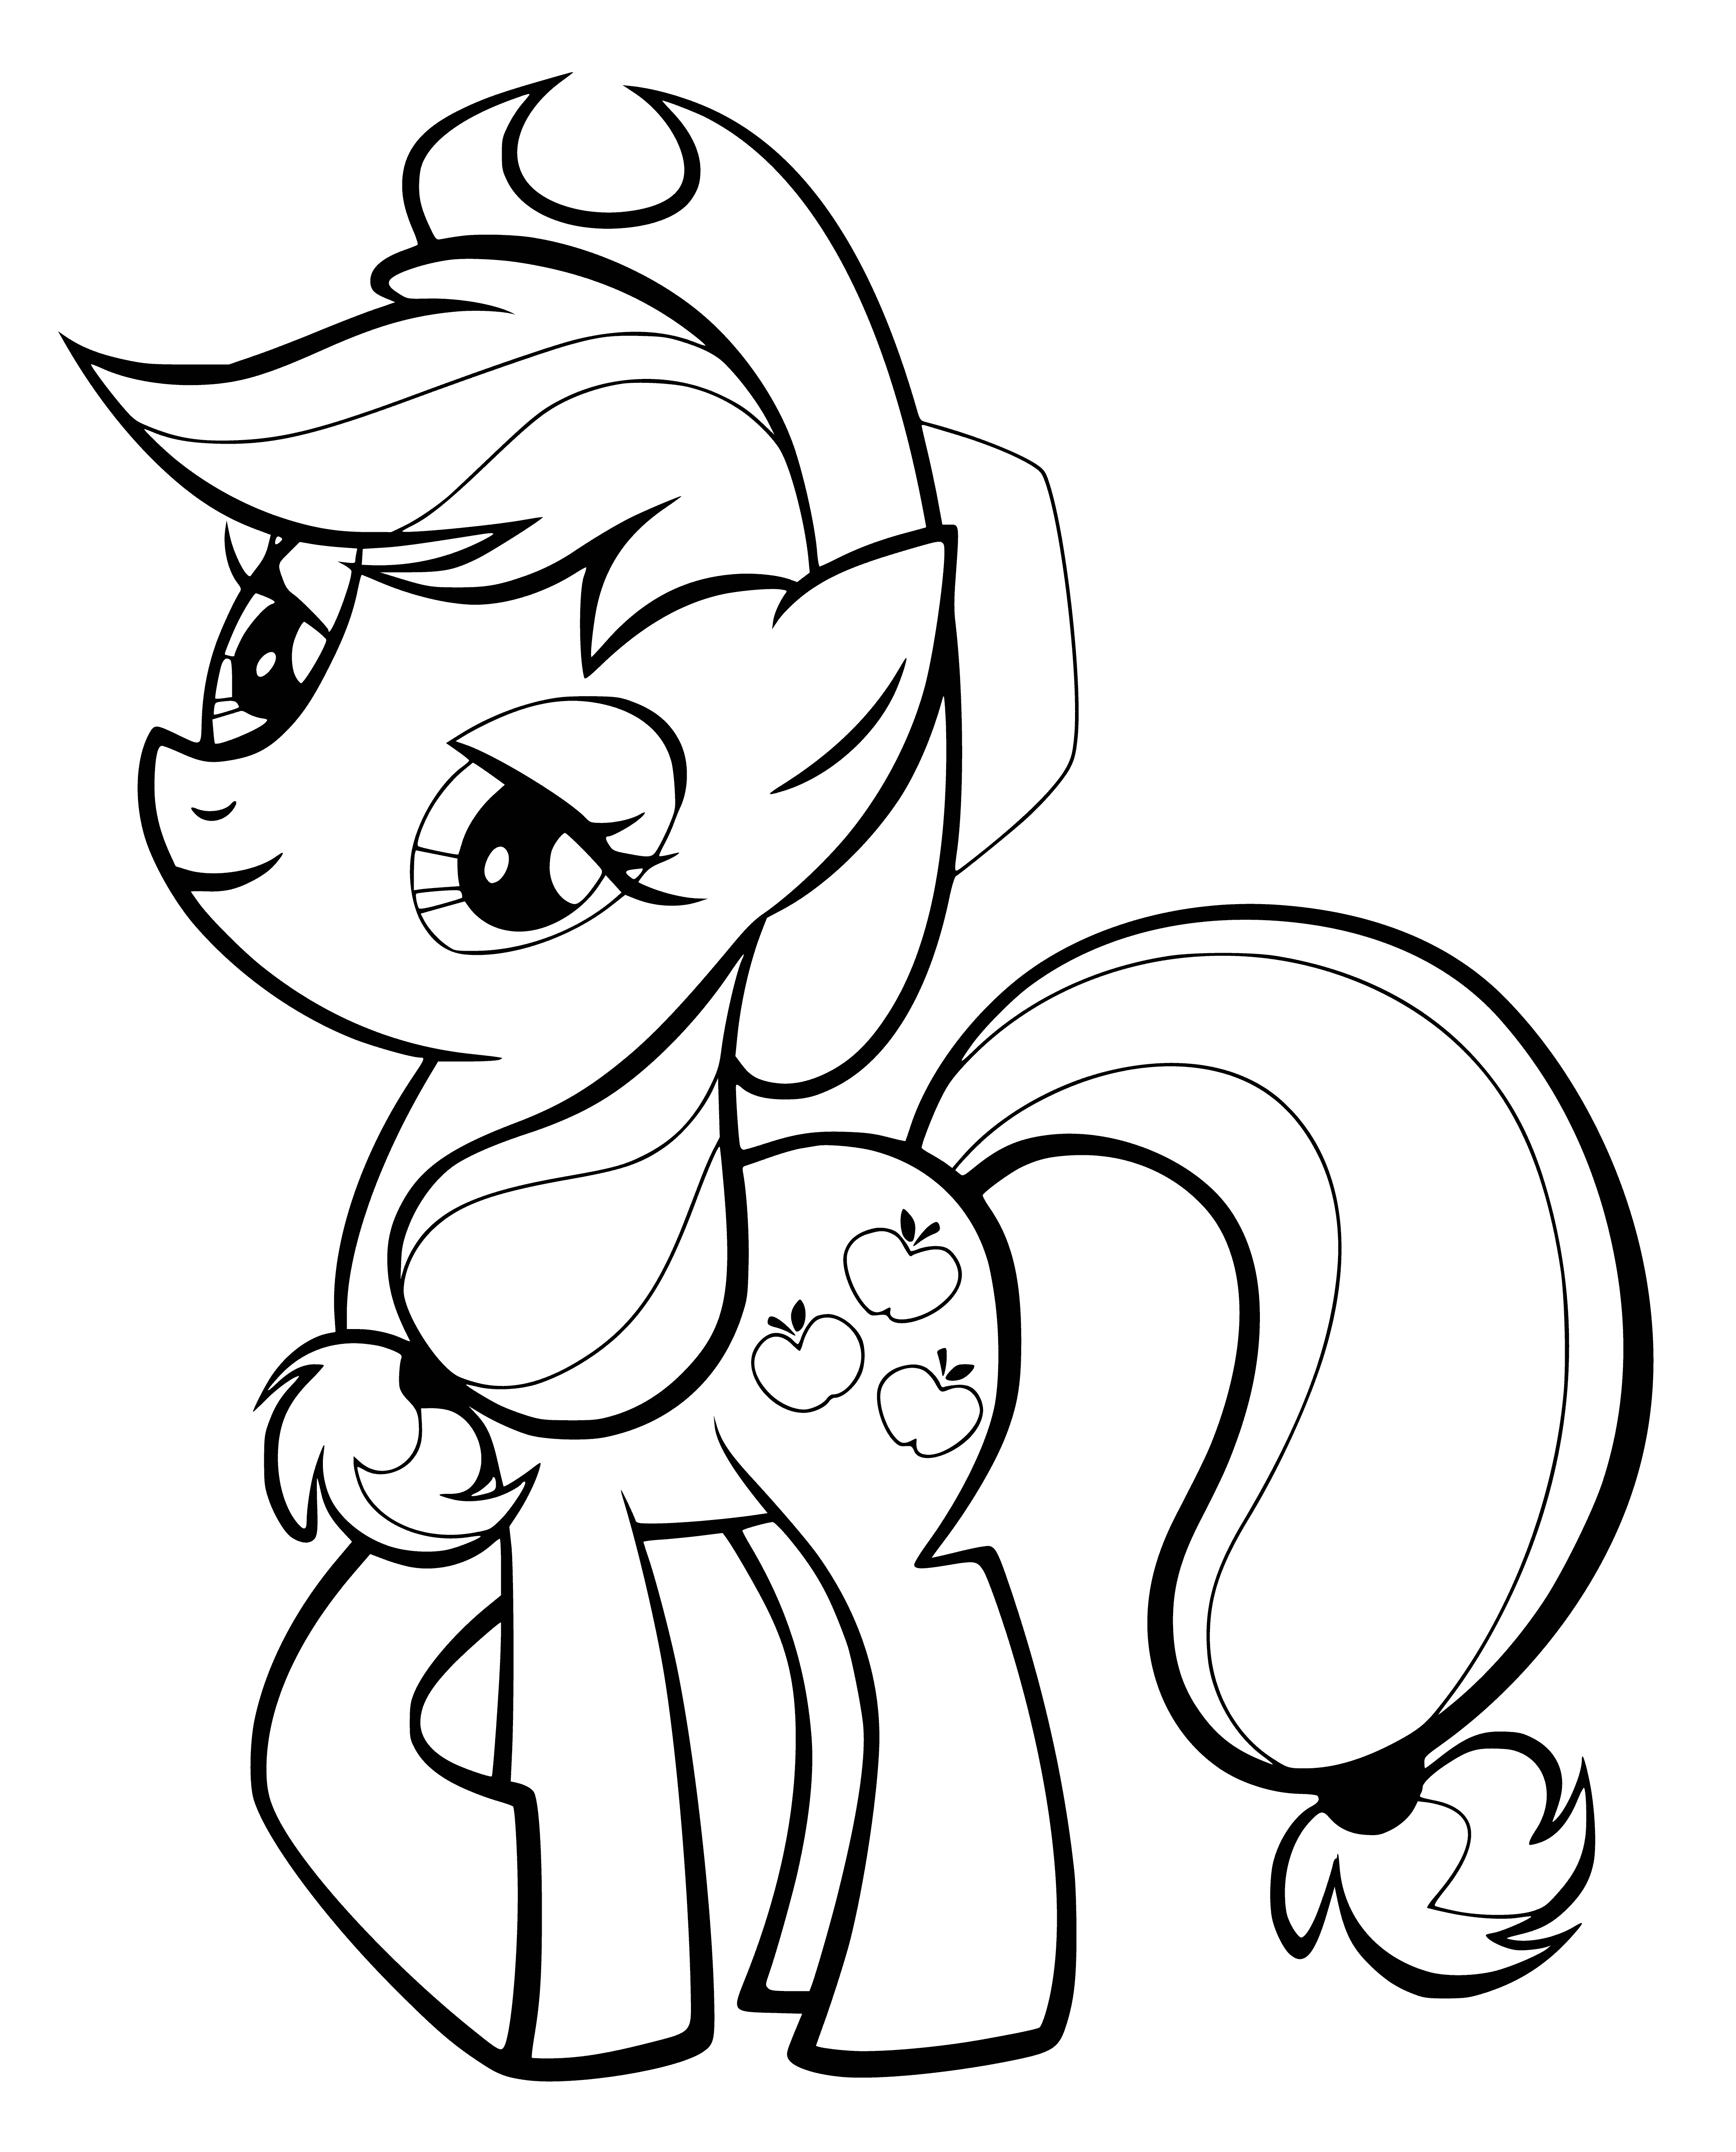 coloring page: Pony Applejack = light brown w/ dark brown mane & tail; golden horseshoe & green/white apple on hooves; wears brown cowboy hat w/ yellow bandanna.